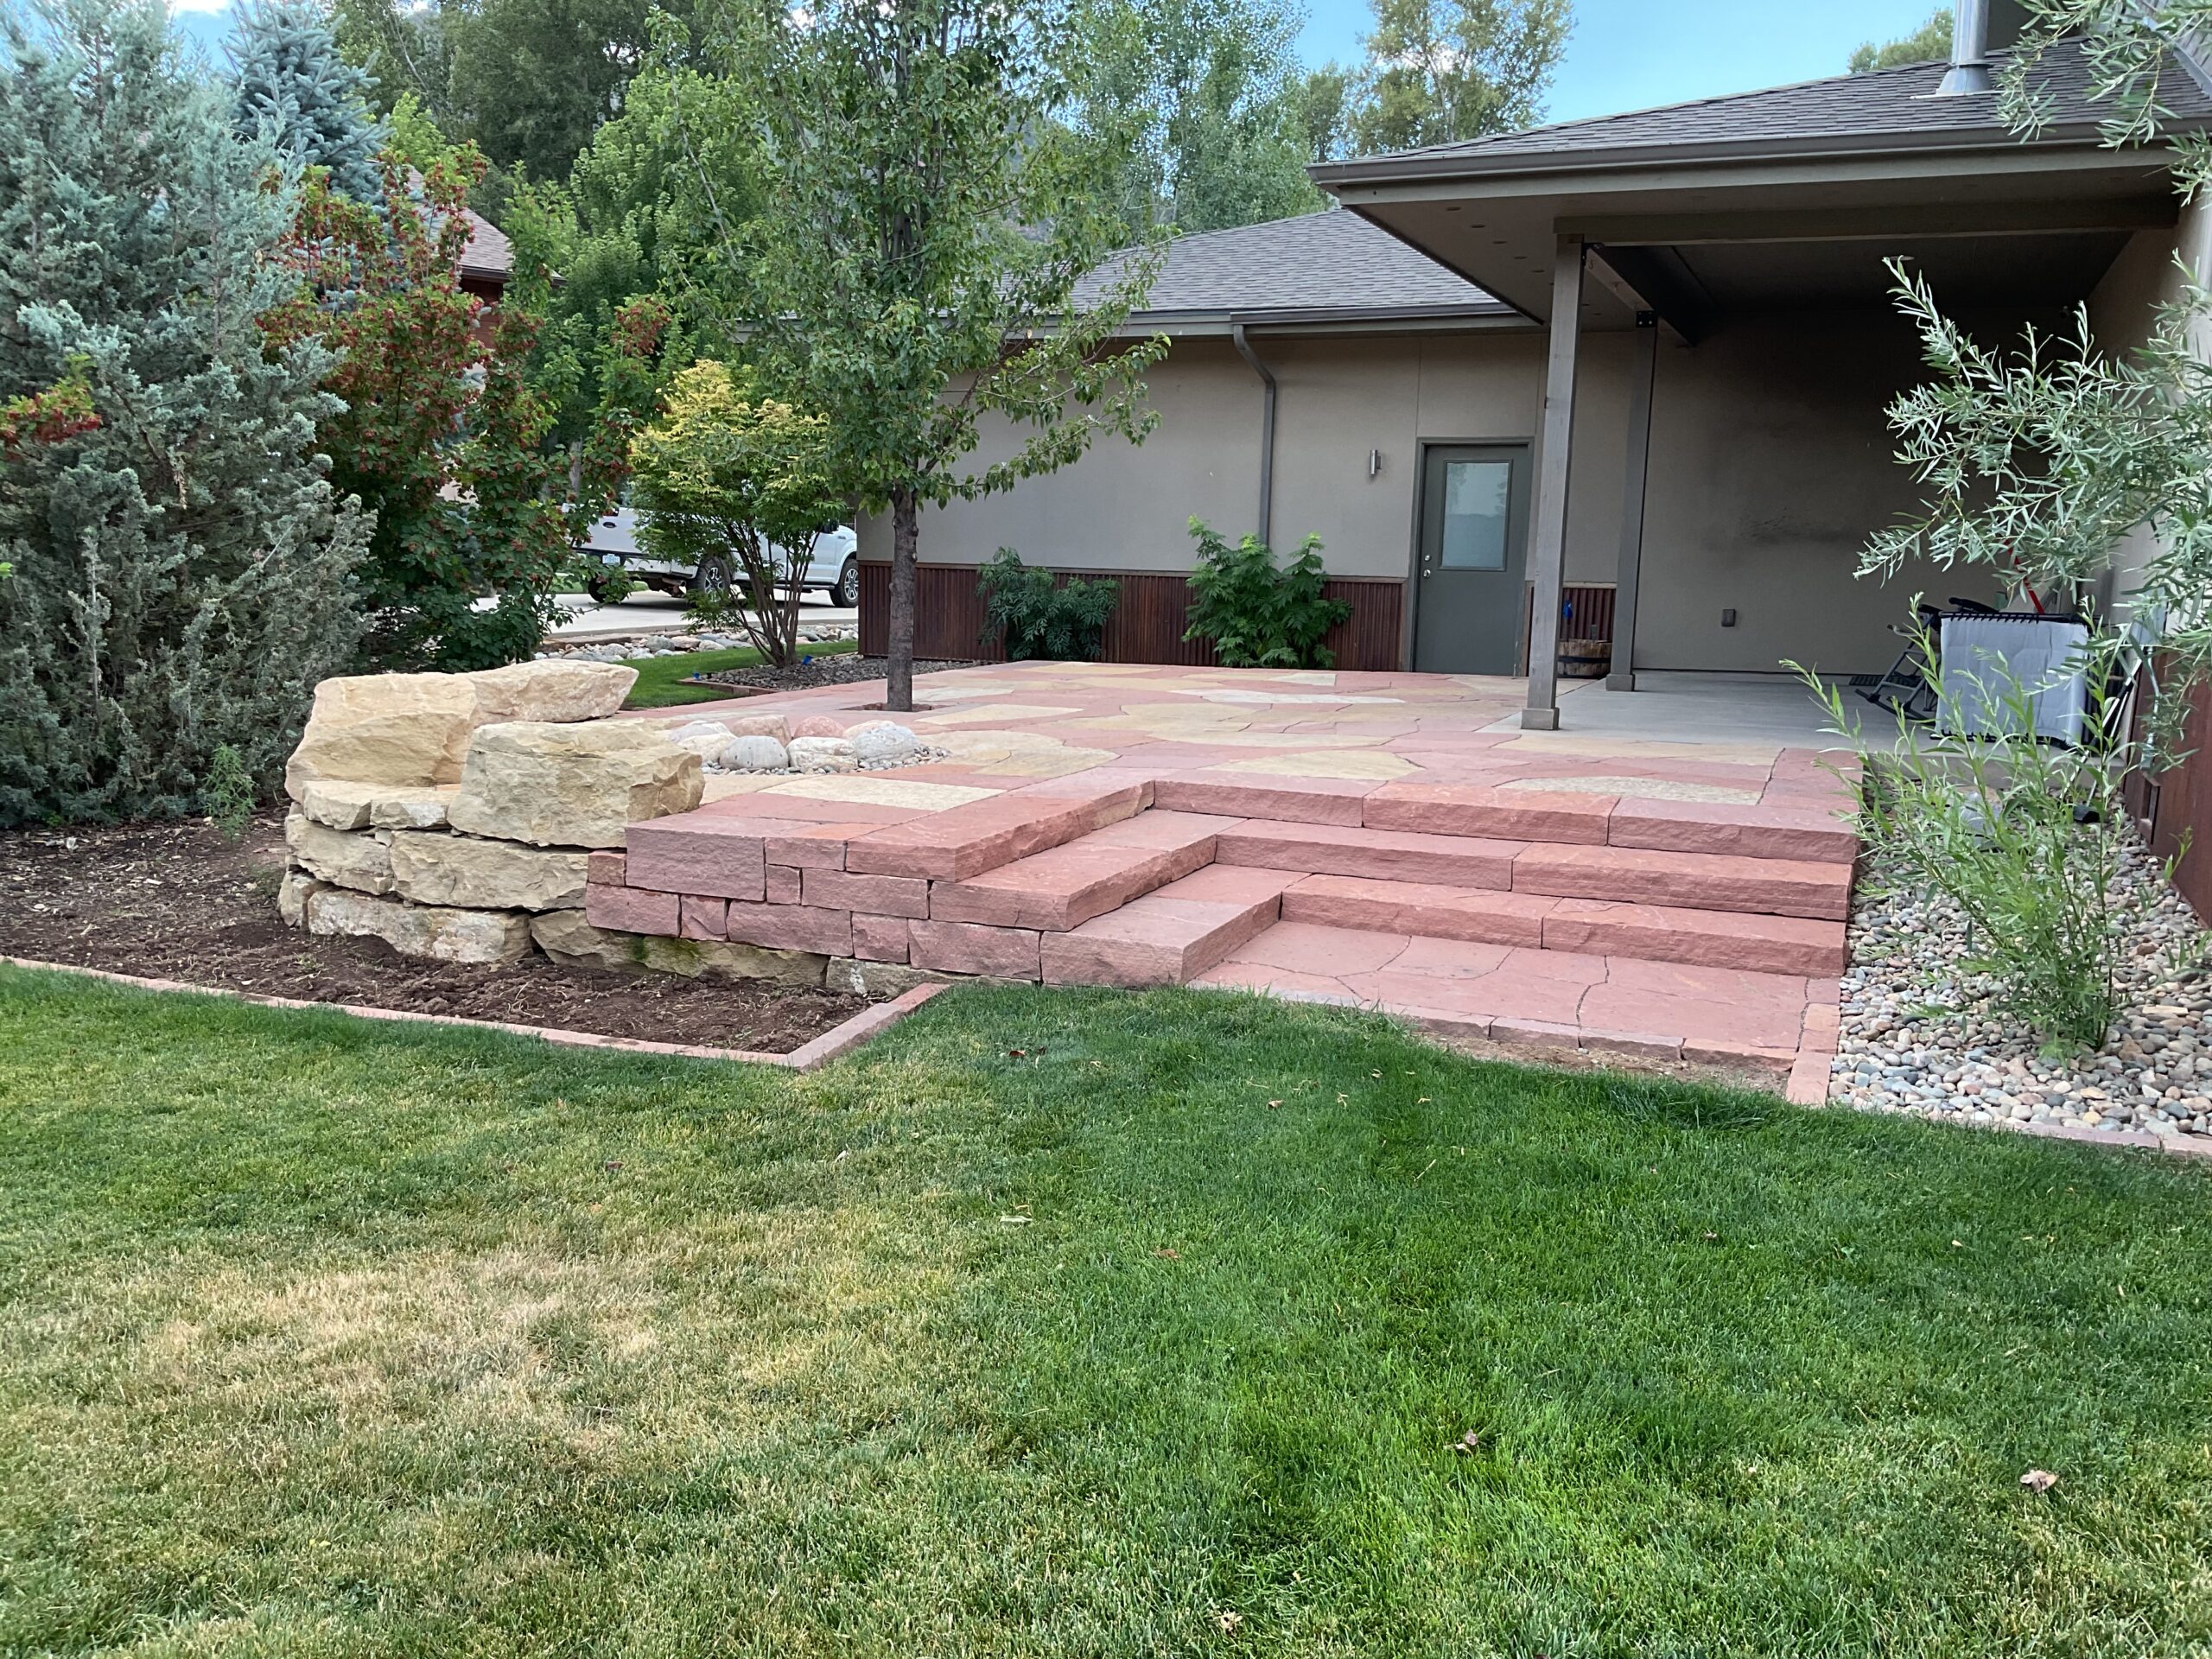 Custom designed flagstone patio terrace with two custom natural stone slab staircases, integrated boulder seating, and rustic fire pit